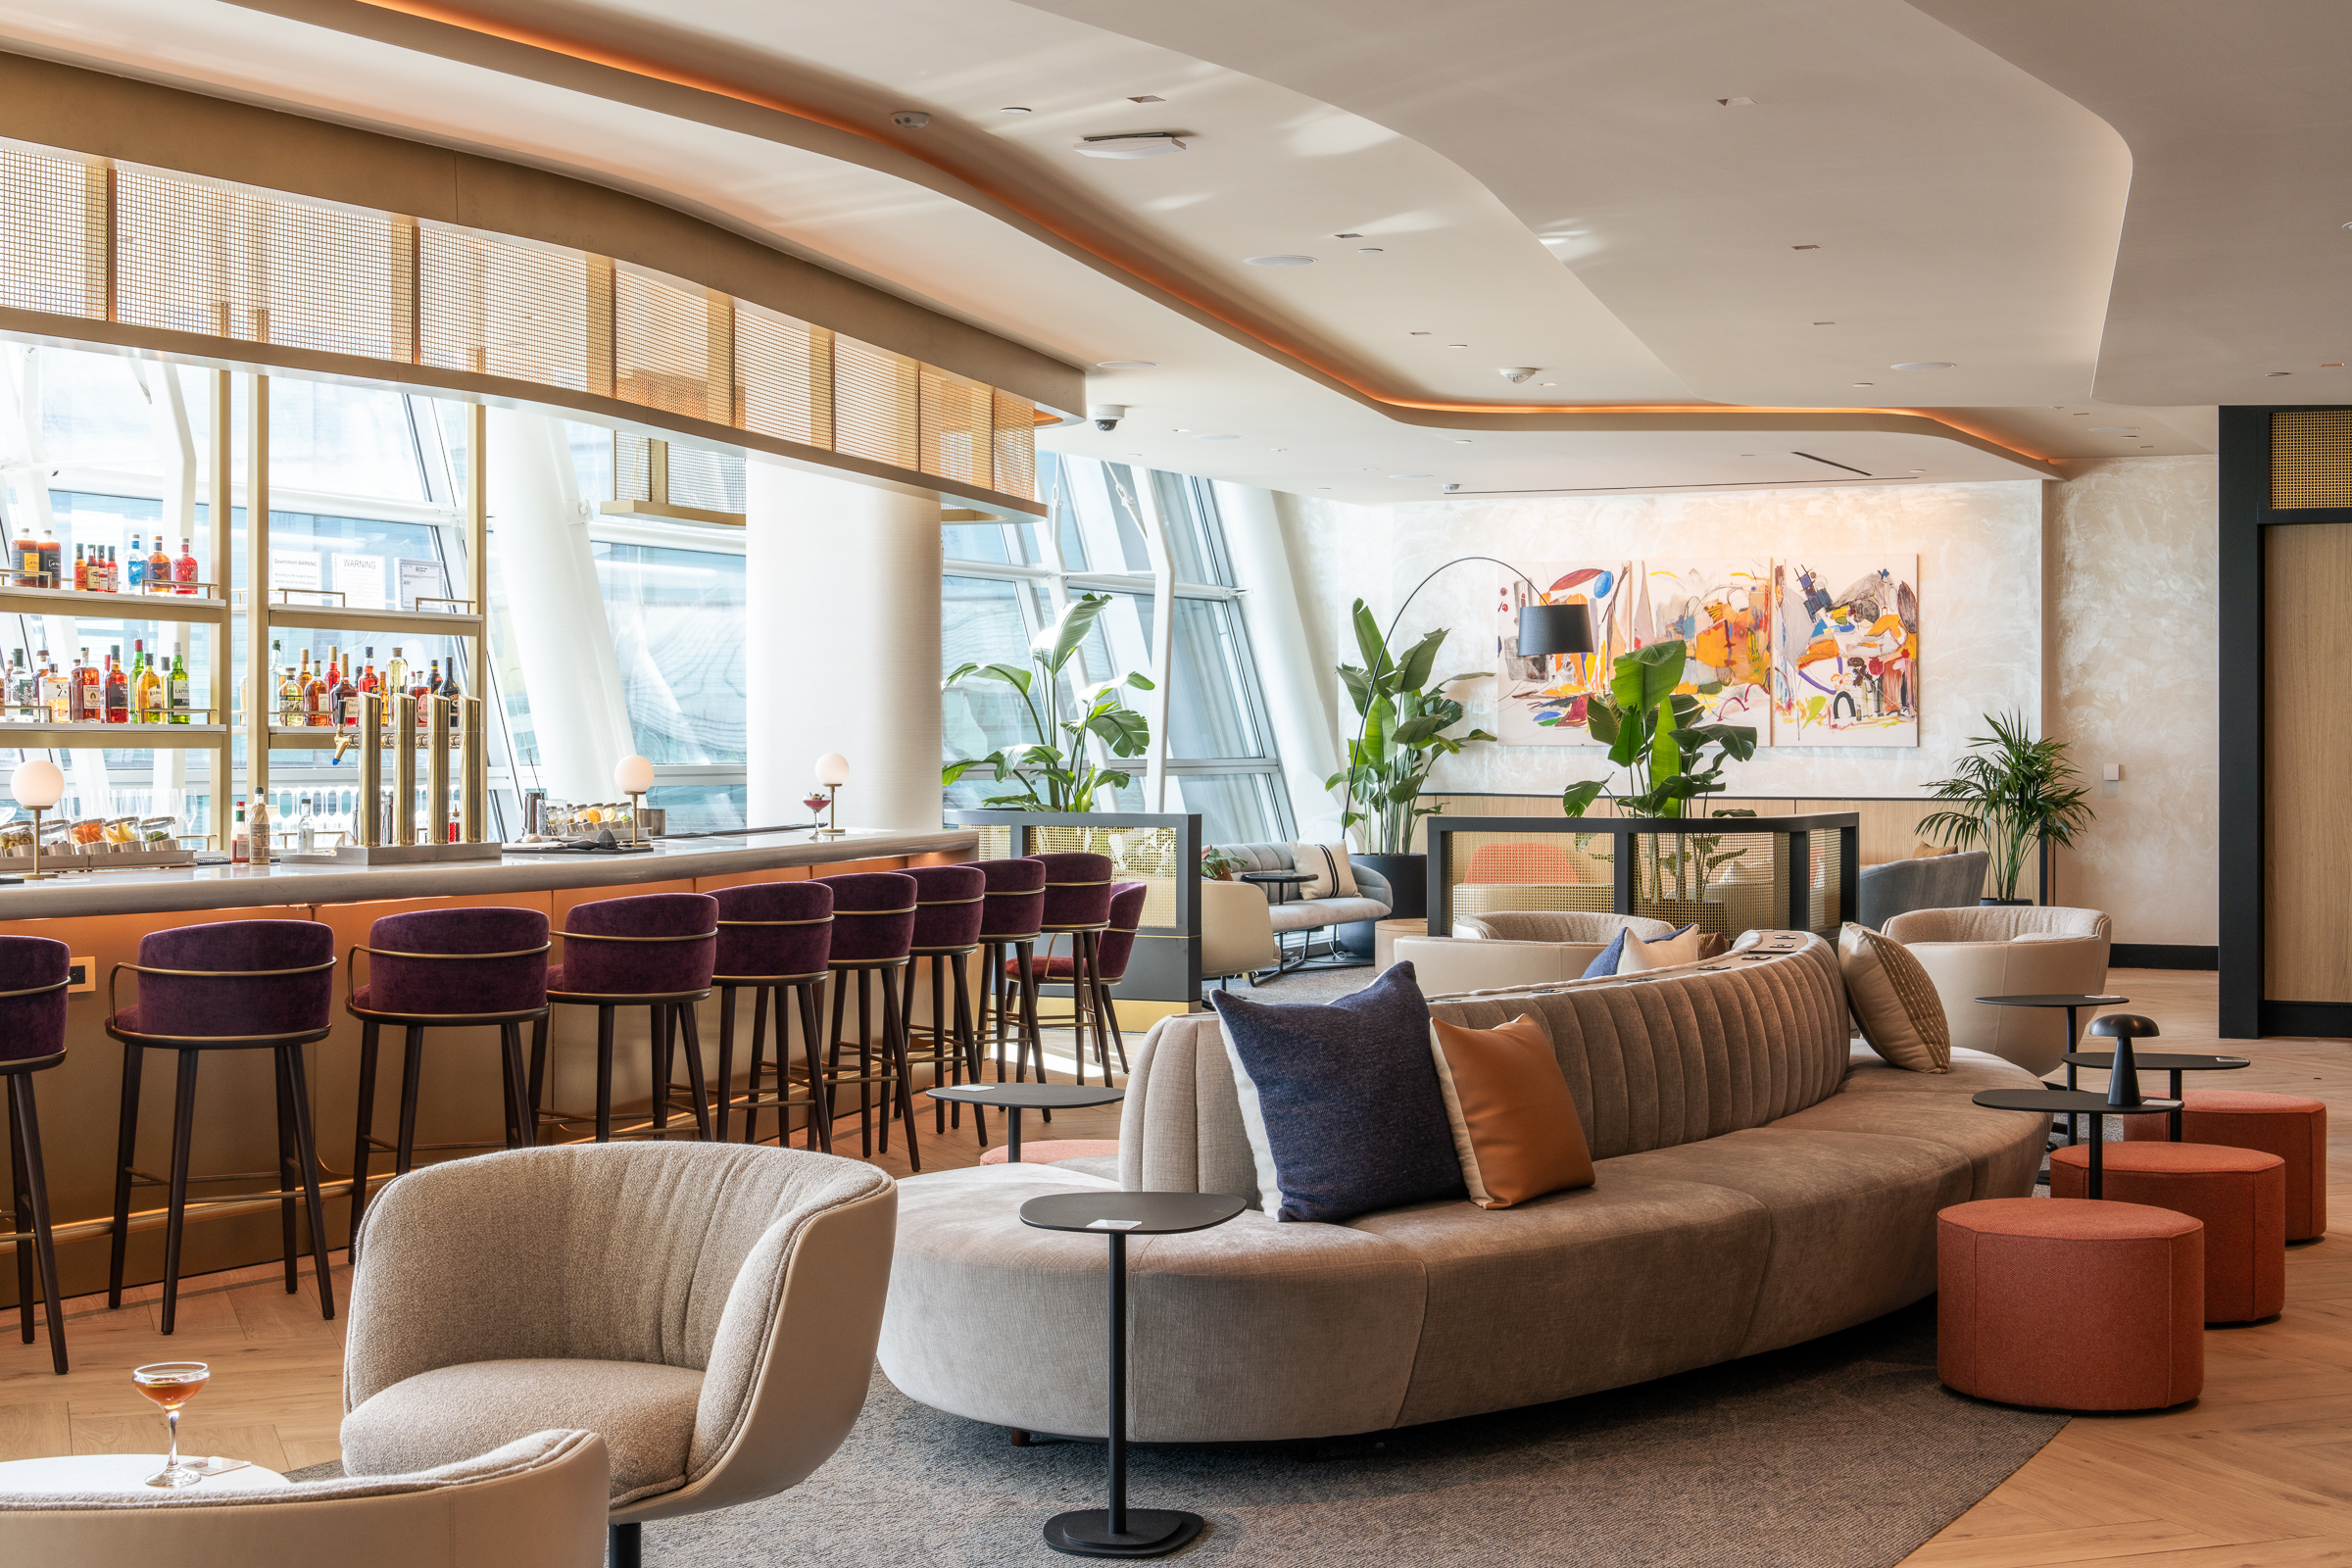 What Is It Like to Visit the New York JFK Chase Sapphire Lounge?